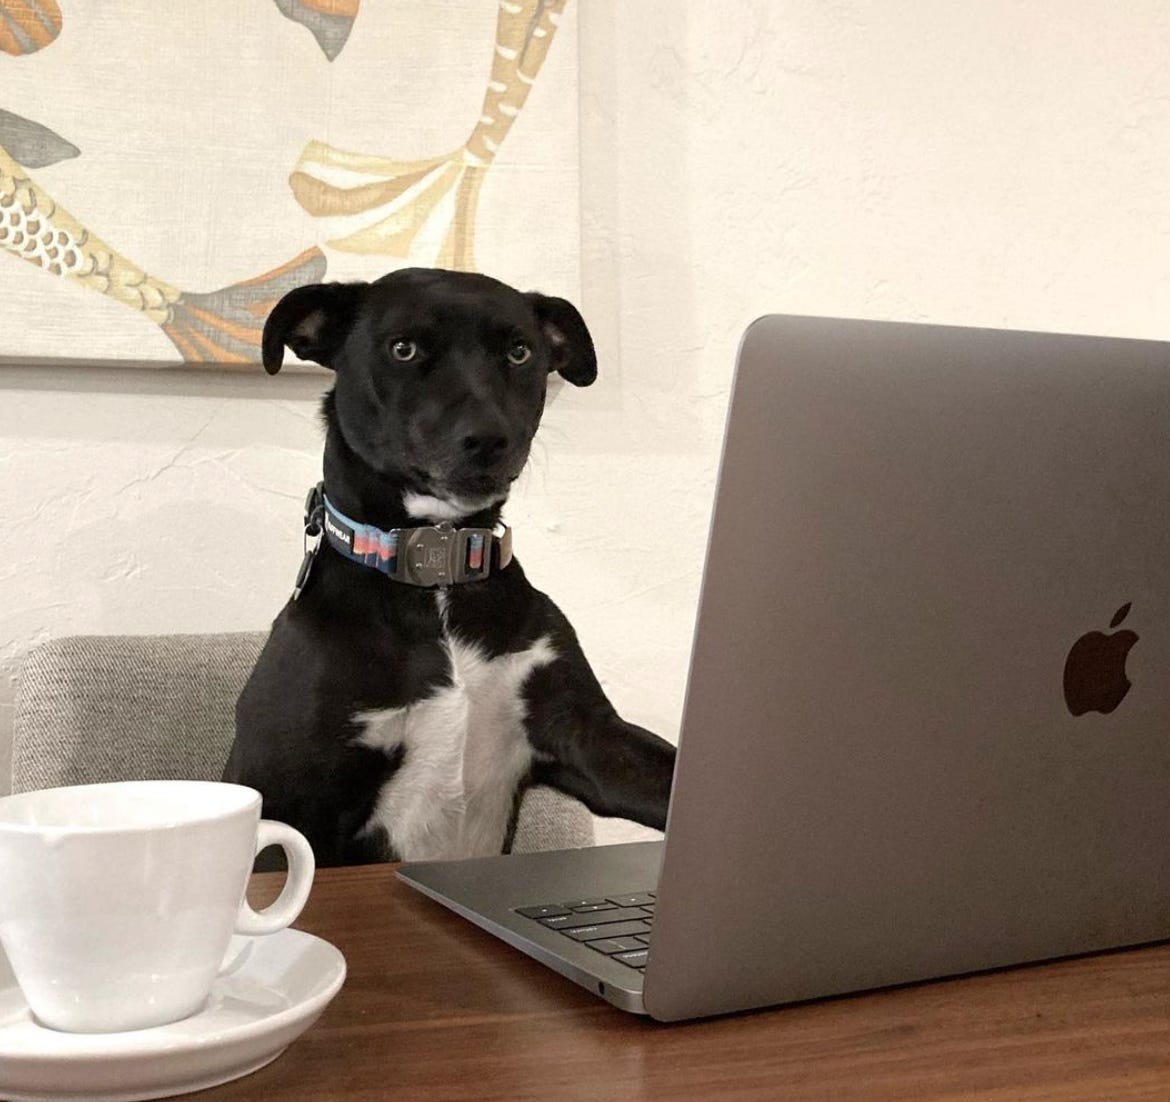 A black dog looking at the camera. The dog is sitting on a chair at the kitchen table with a MacBook laptop open in front of her and a white cup filled with coffee on a saucer.